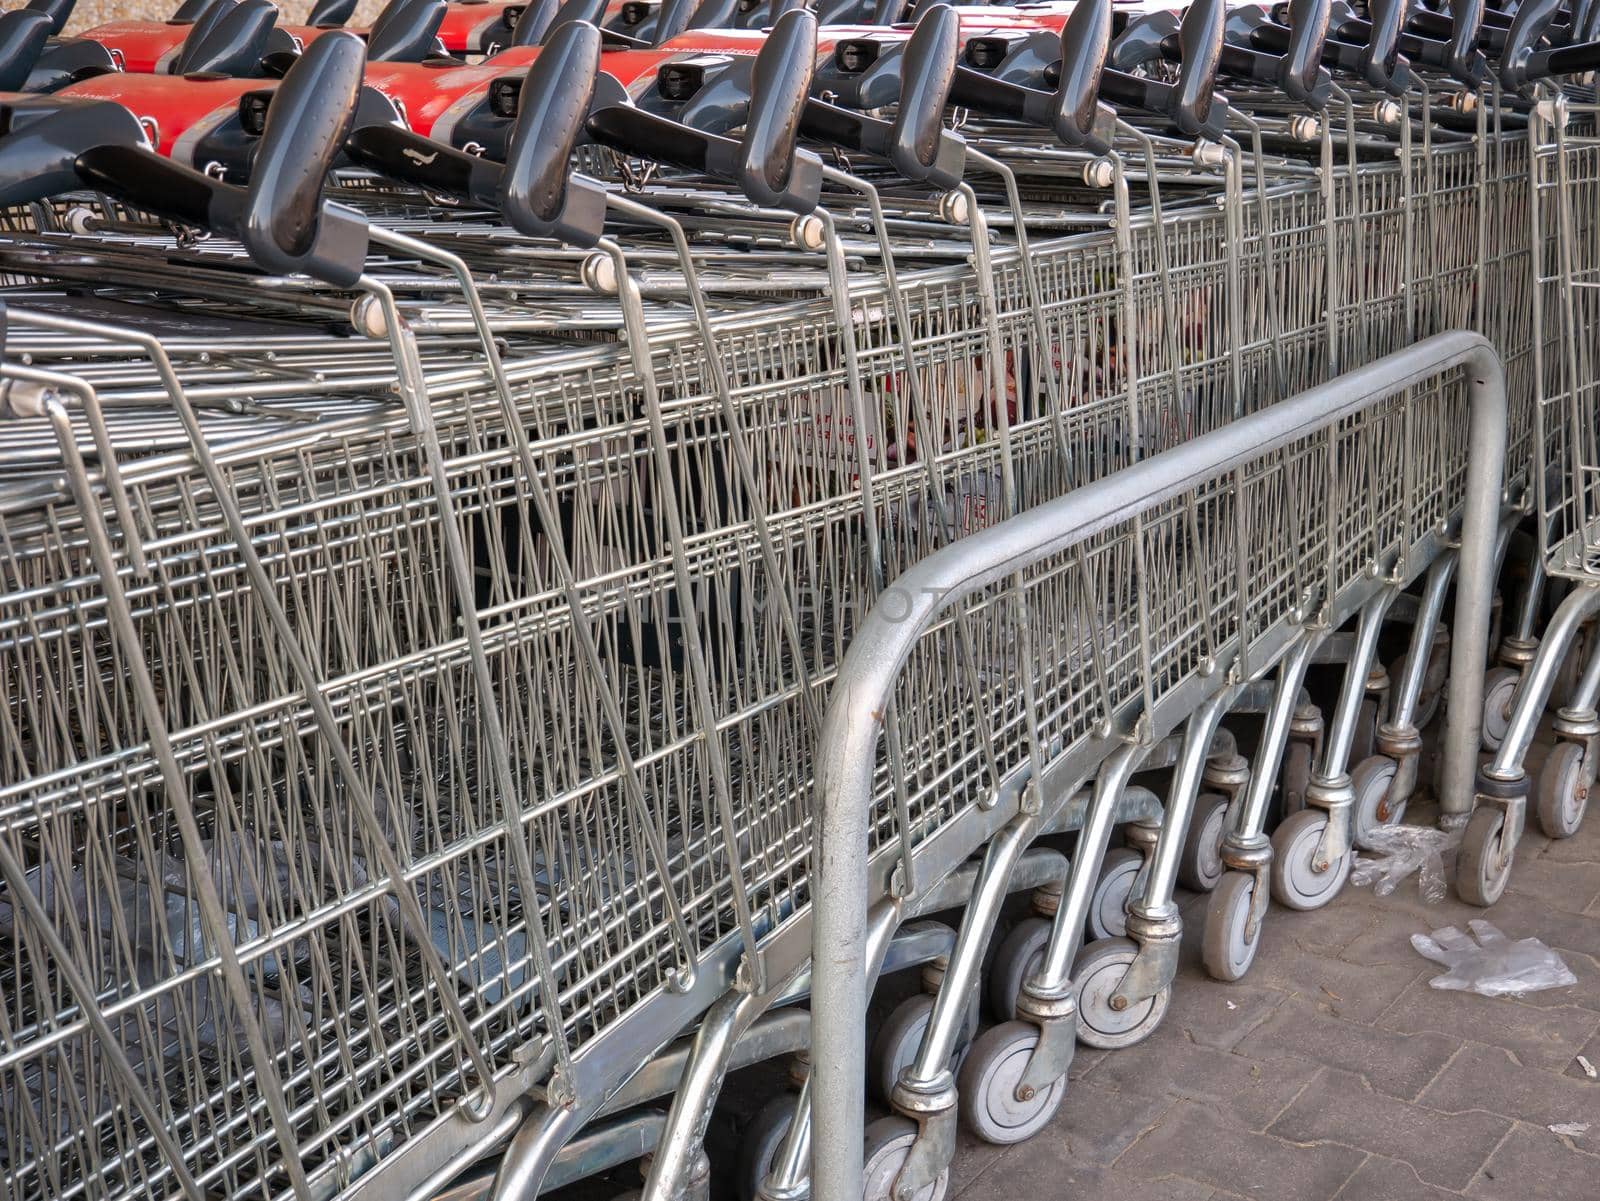 Row of many stacked metal shopping trolley carts